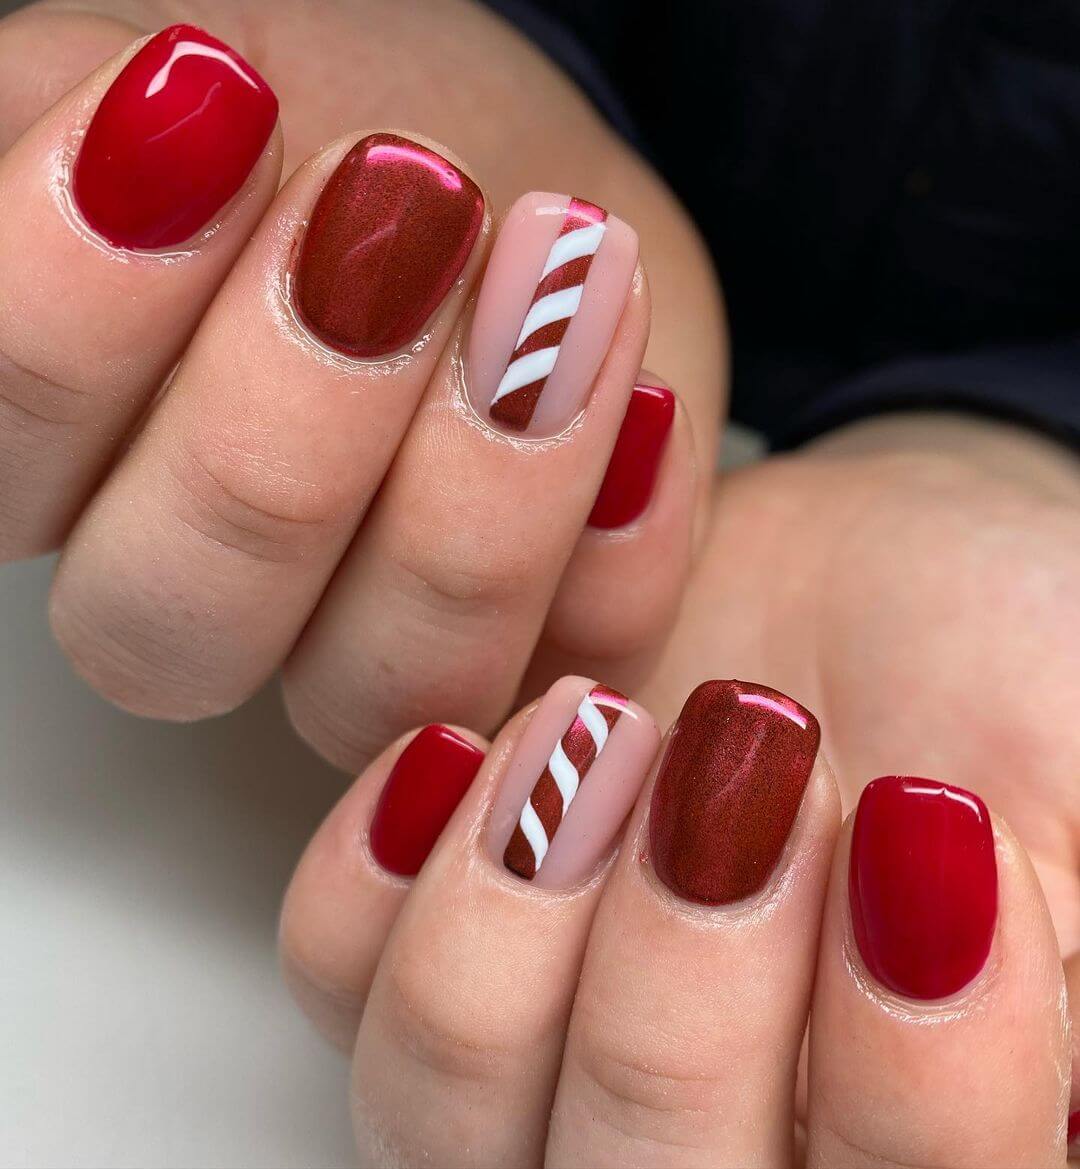 The Sweet Candy Cane